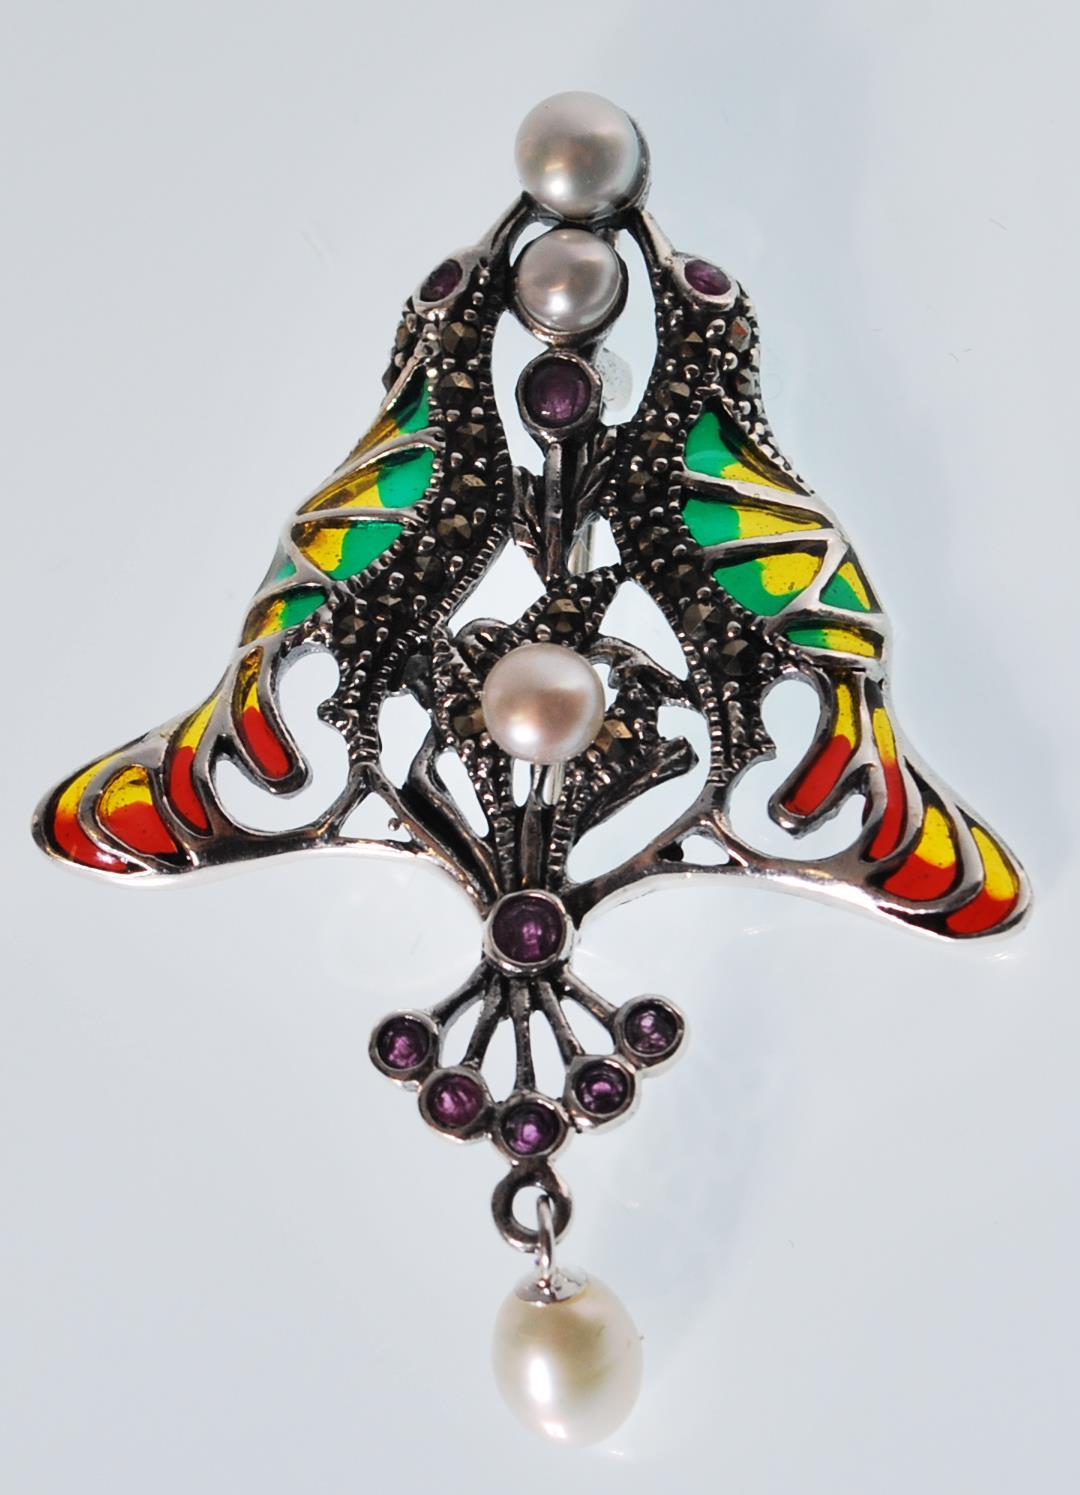 A stamped 925 silver plique a jour Art Nouveau style pendant brooch set with red stones and